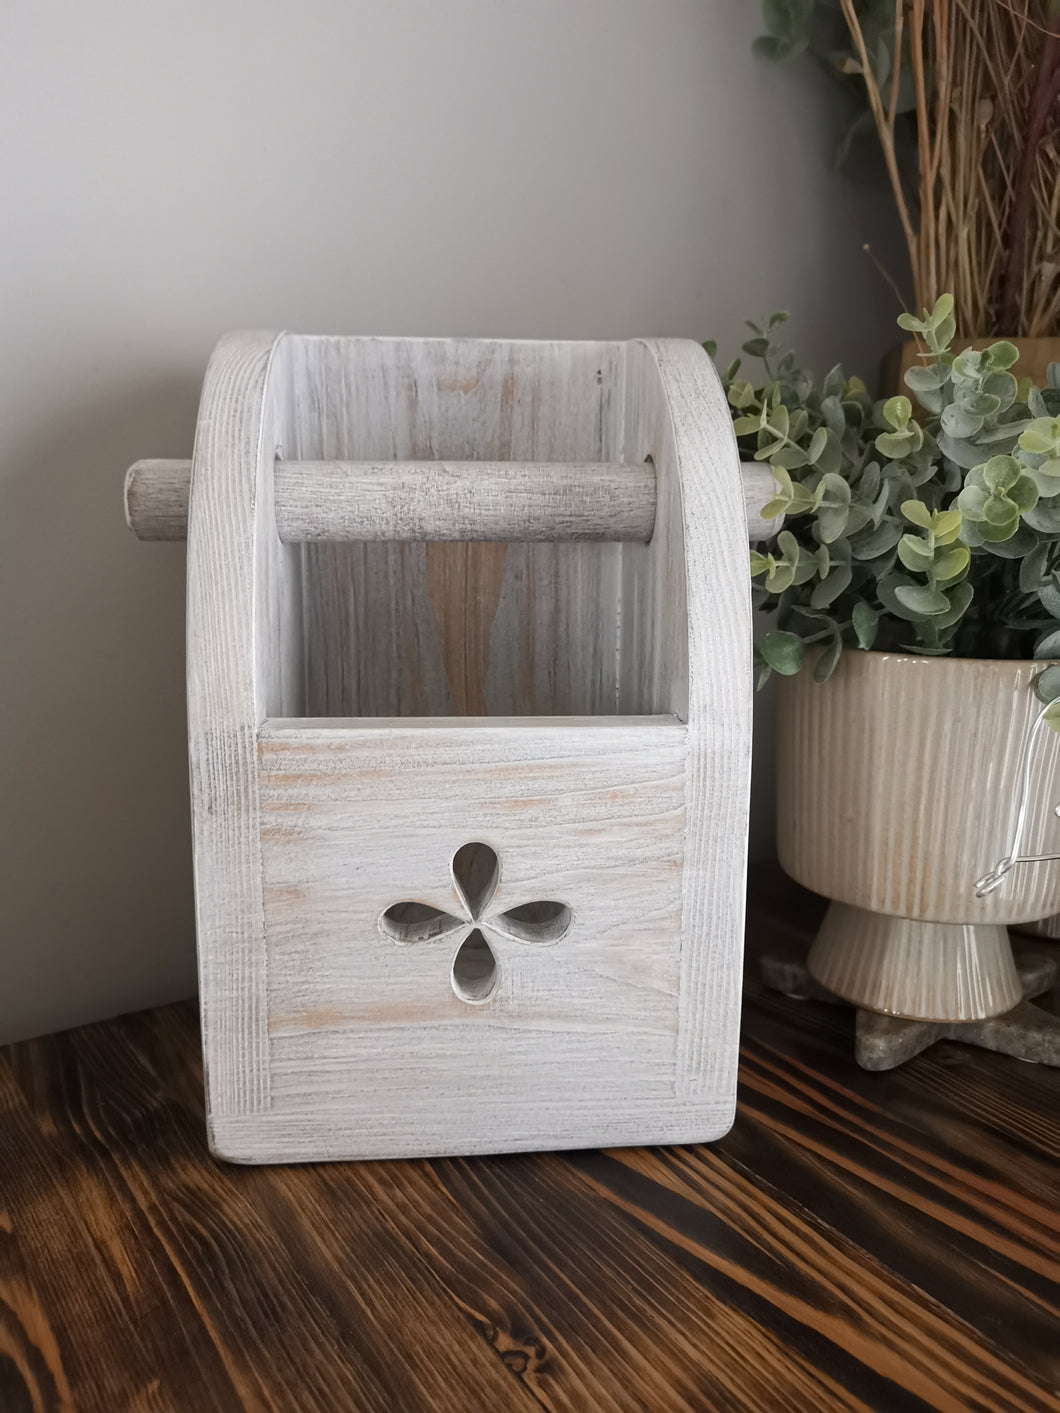 Wooden Toilet roll holder, Wall mounted or Freestanding,quirky loo roll, wooden rack, bathroom accessories